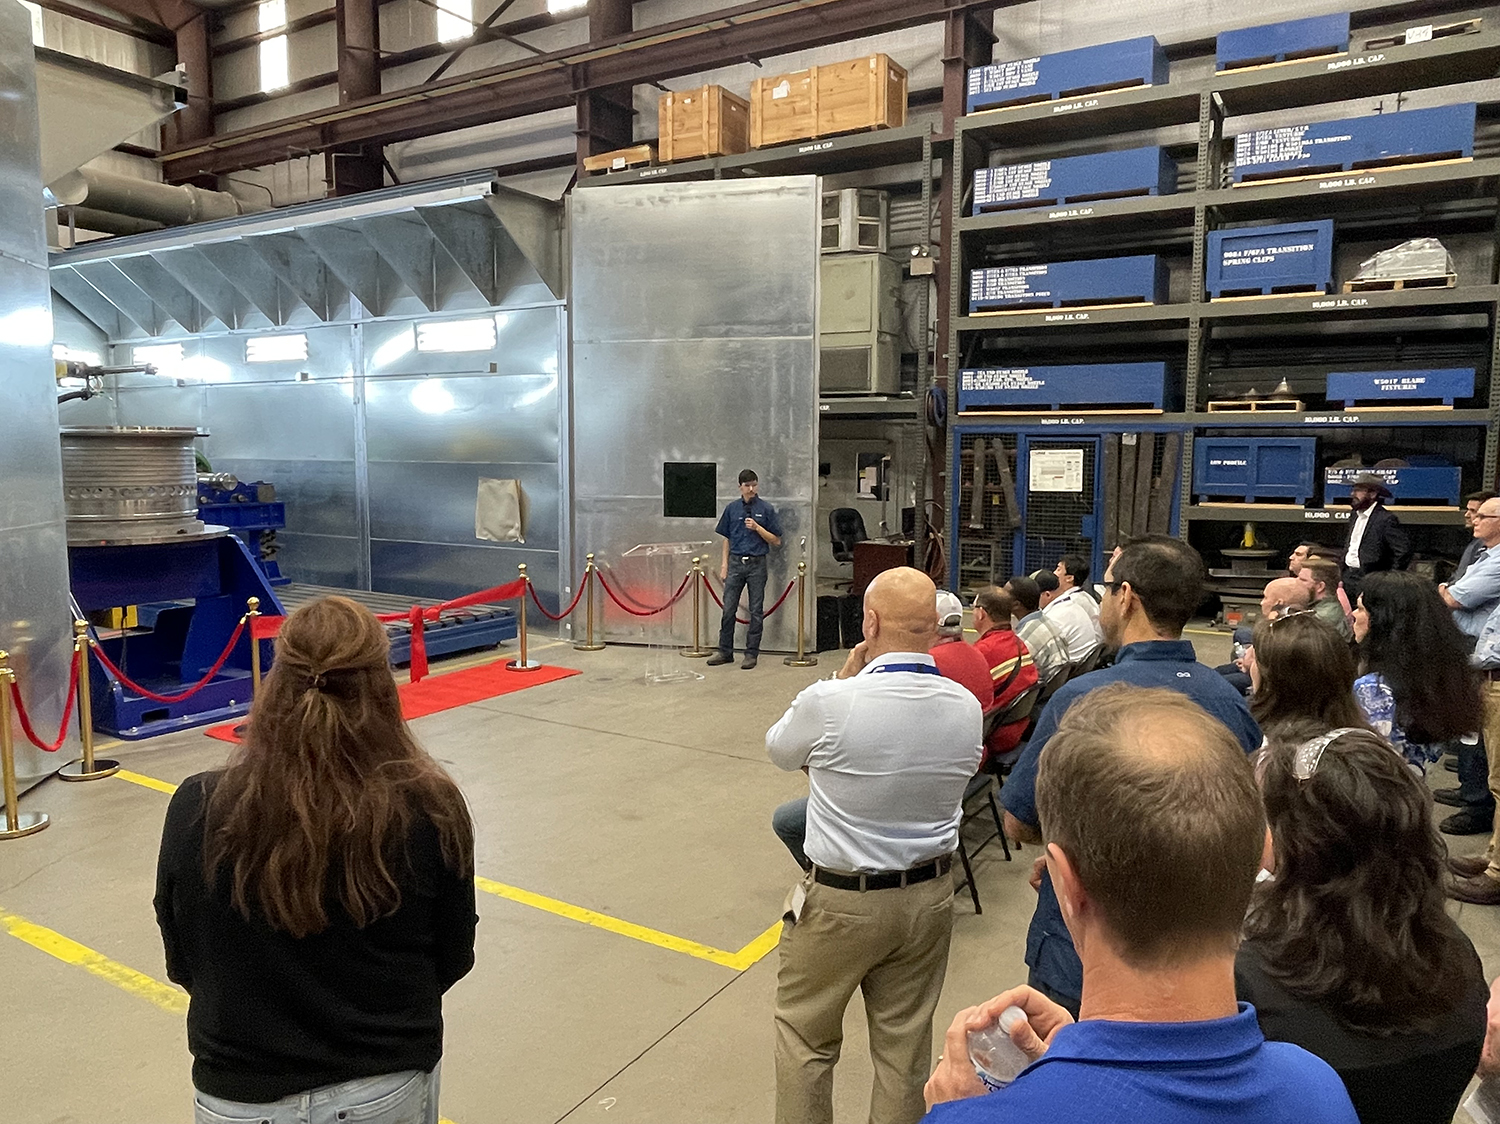 During the day, attendees were treated to private tours of this advanced additive manufacturing process with Sulzer experts on hand to explain the multiple benefits for turbomachinery repair and upgrade projects.